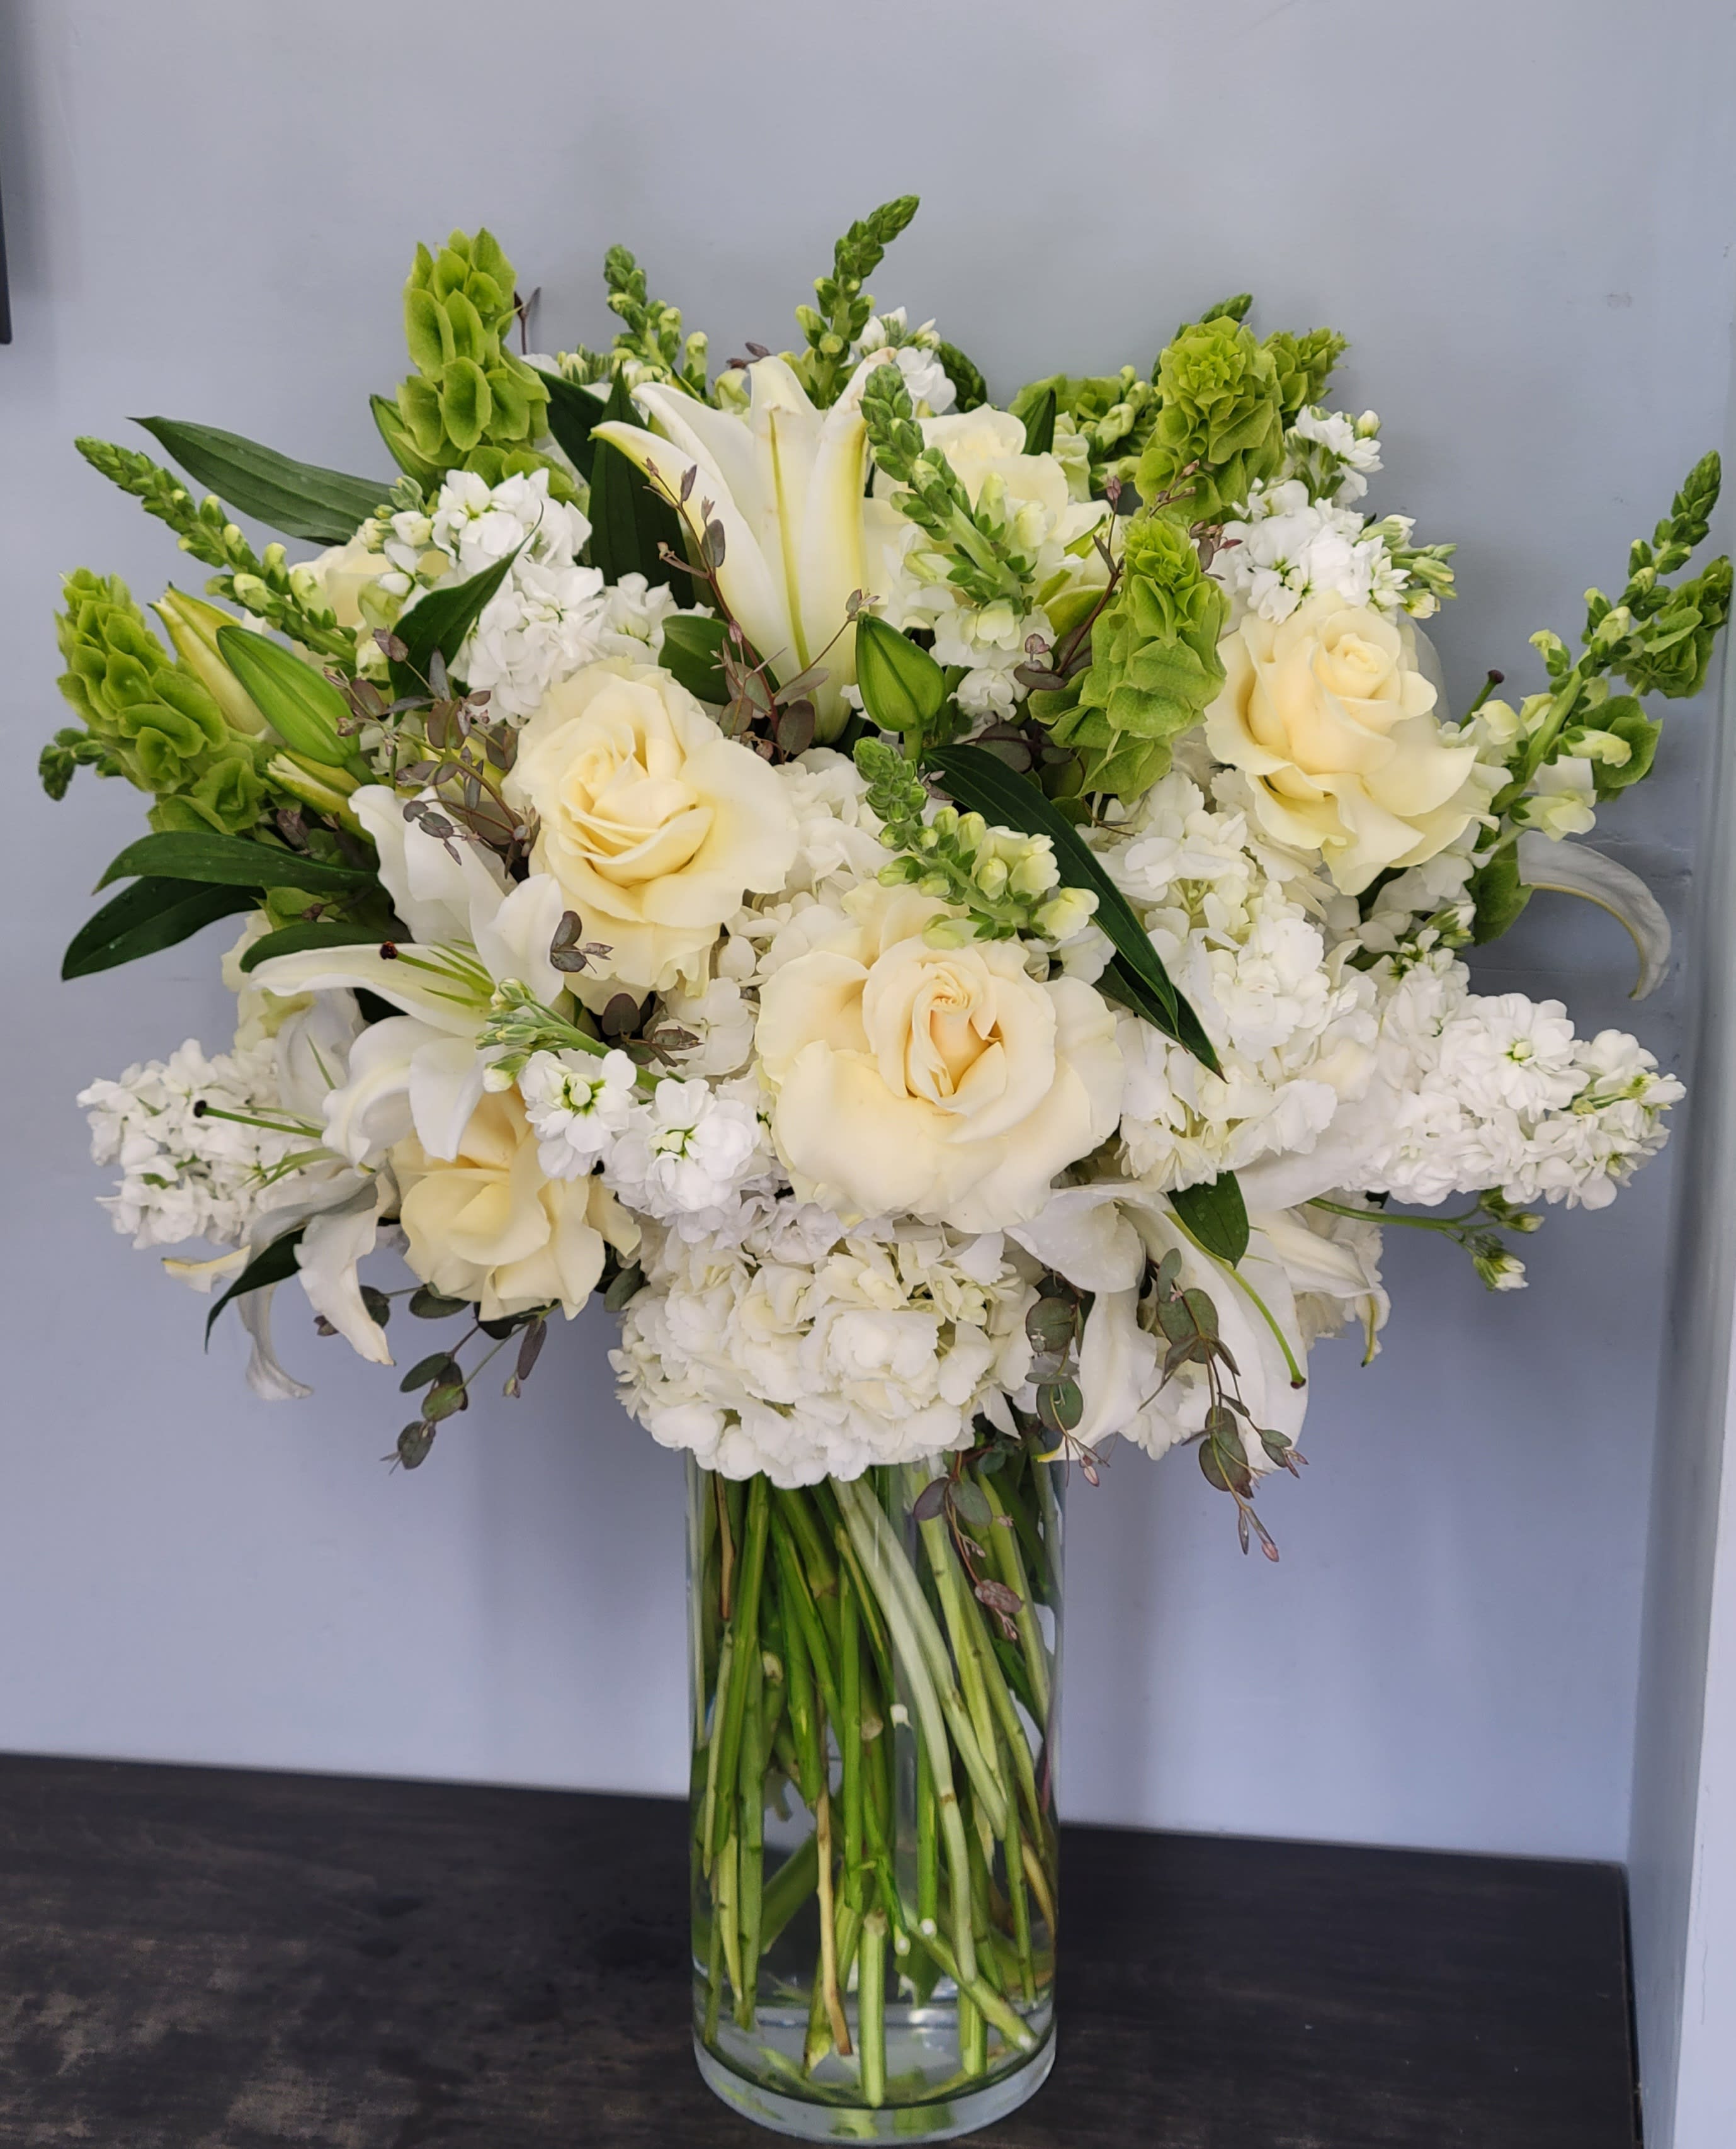 Country French Arrangement - Country French arrangement with lilies, hydrangea, roses, bells of Ireland, and snap dragons. Dimensions 14-18 in diameter, 16-22 in height.